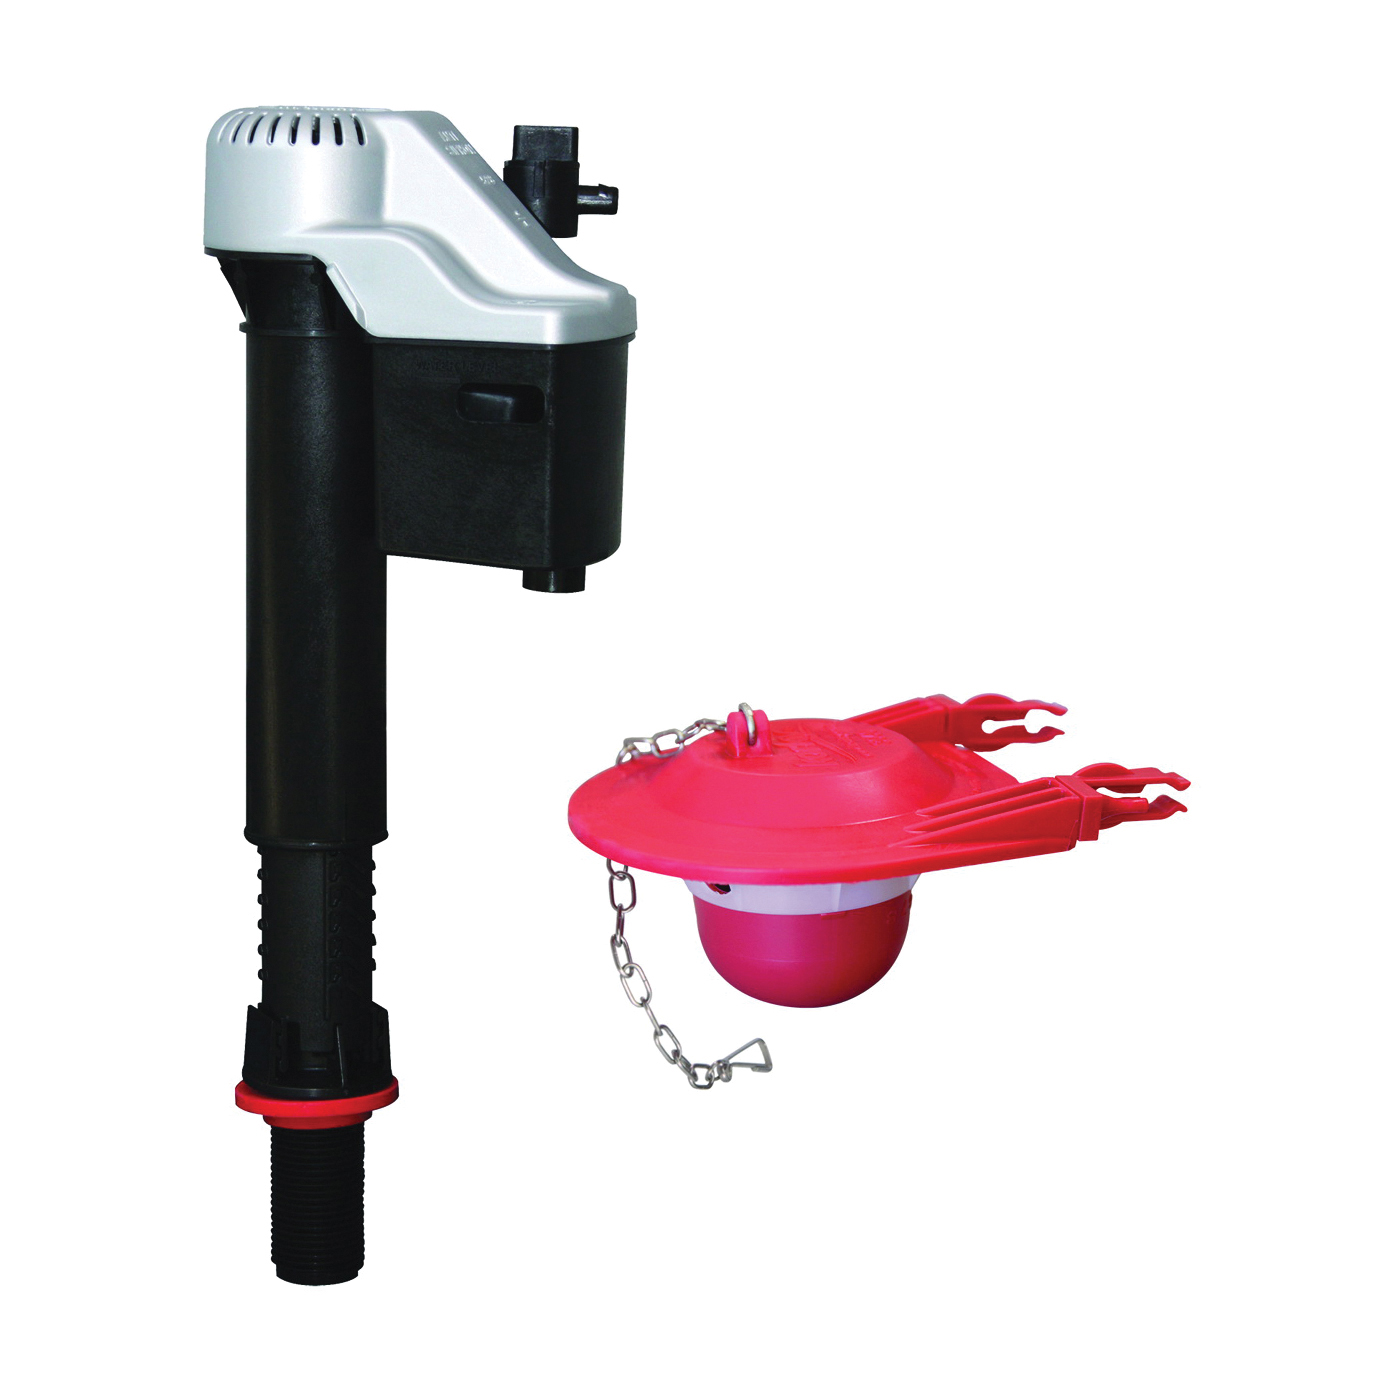 QuietFILL Platinum Series 830MP Toilet Fill Valve and Flapper Kit, <=1.6 gpf, Red, Anti-Siphon: No